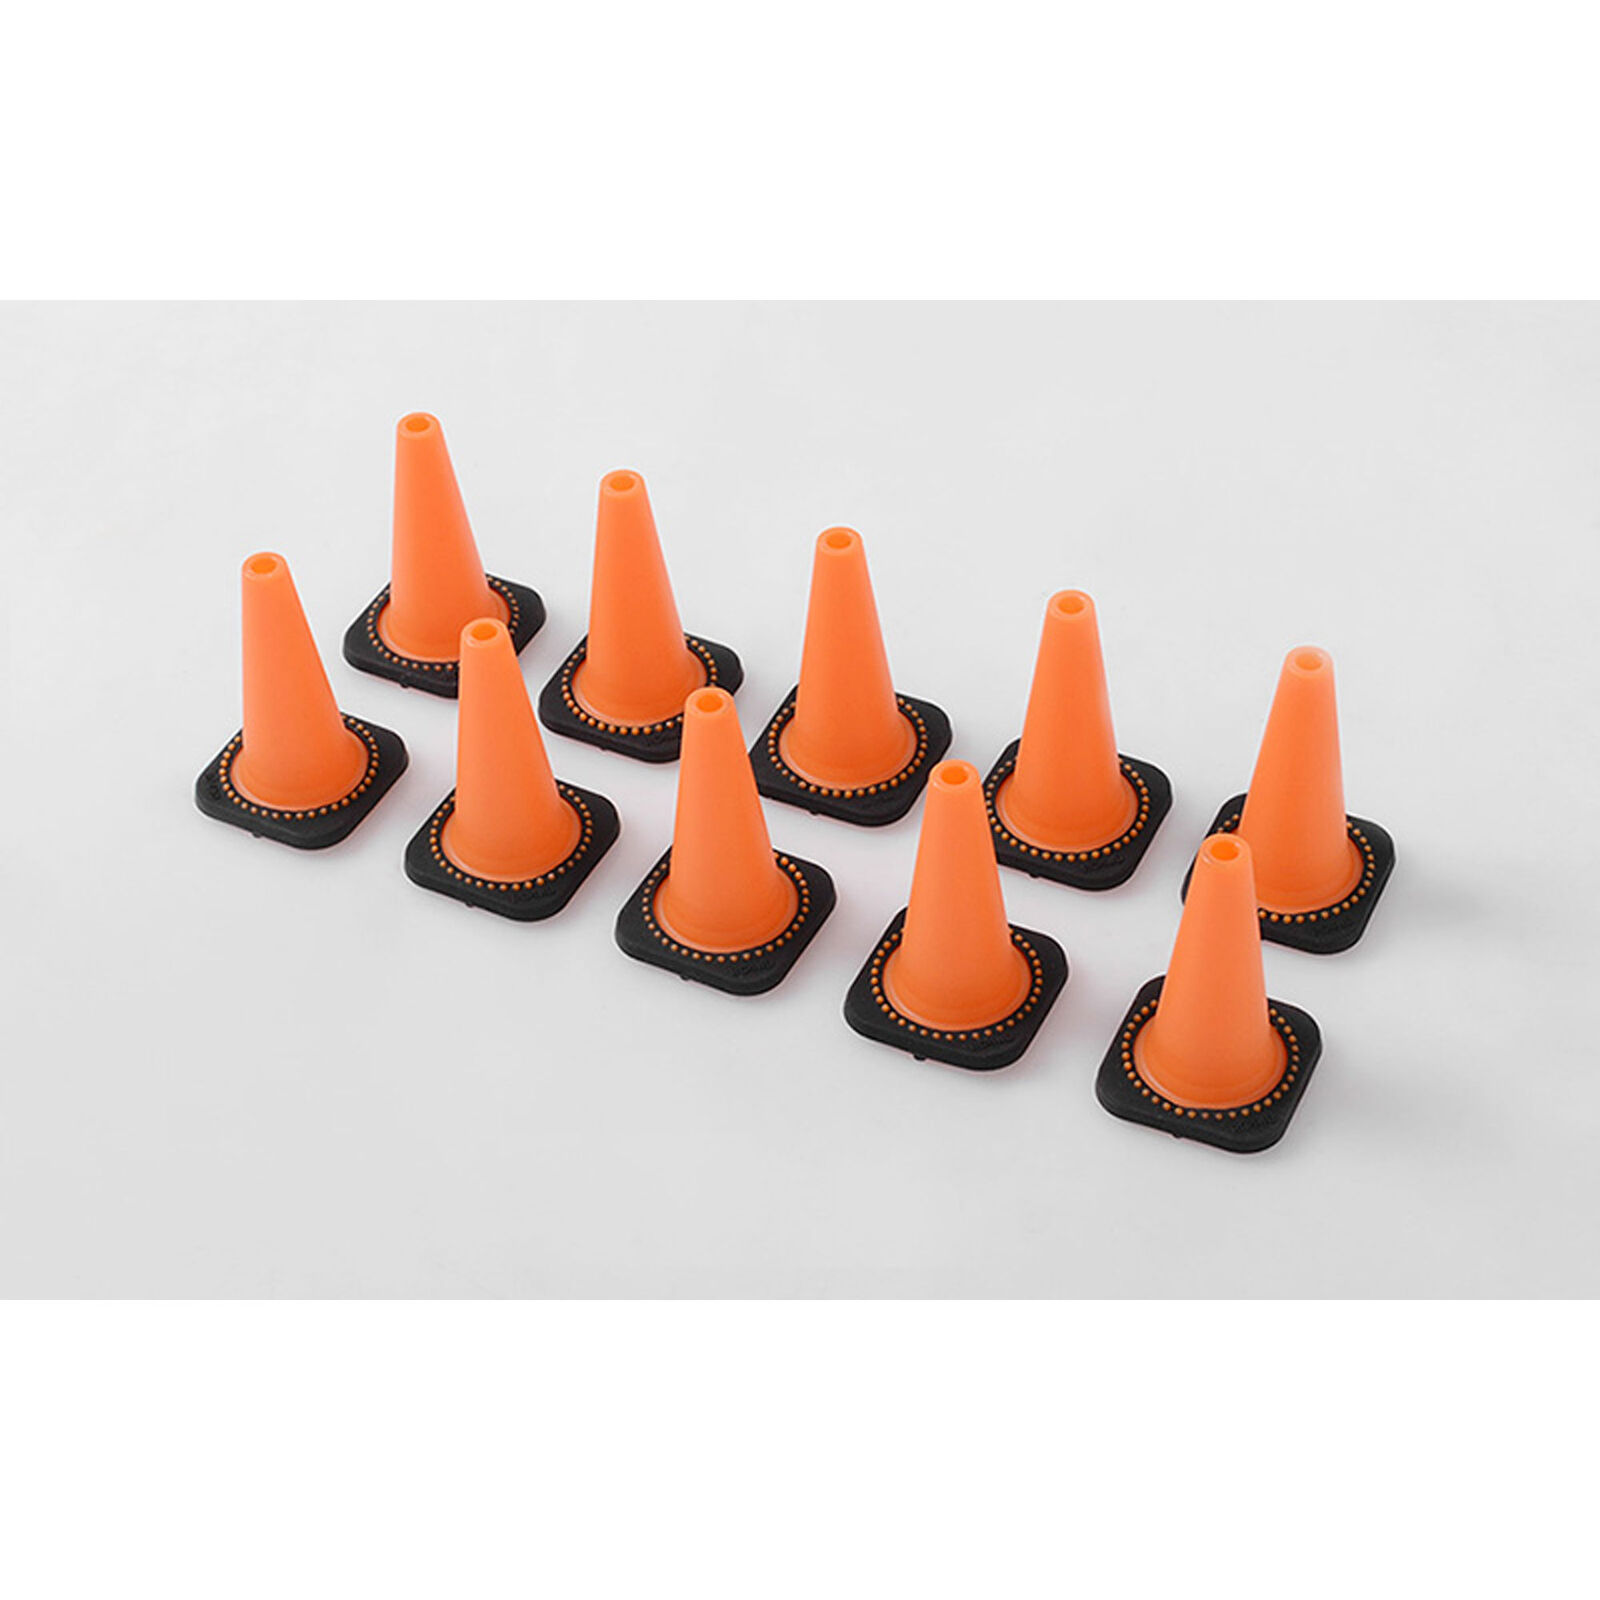 1/10 Remote Control Hobby Size Traffic Cones (10)